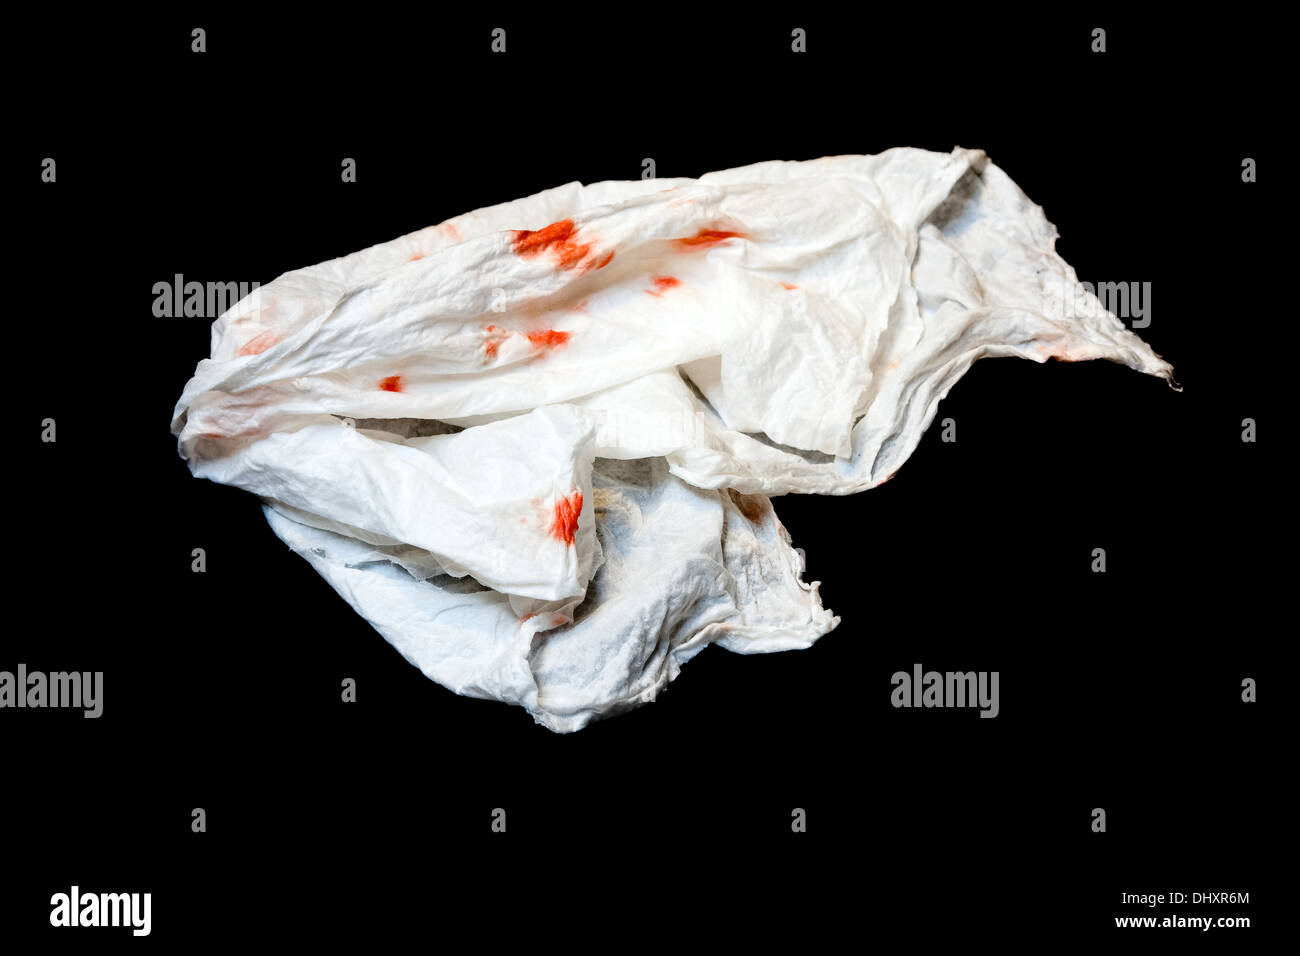 Isolated white used tissue with blood spots due to heavy sniffle Stock Photo